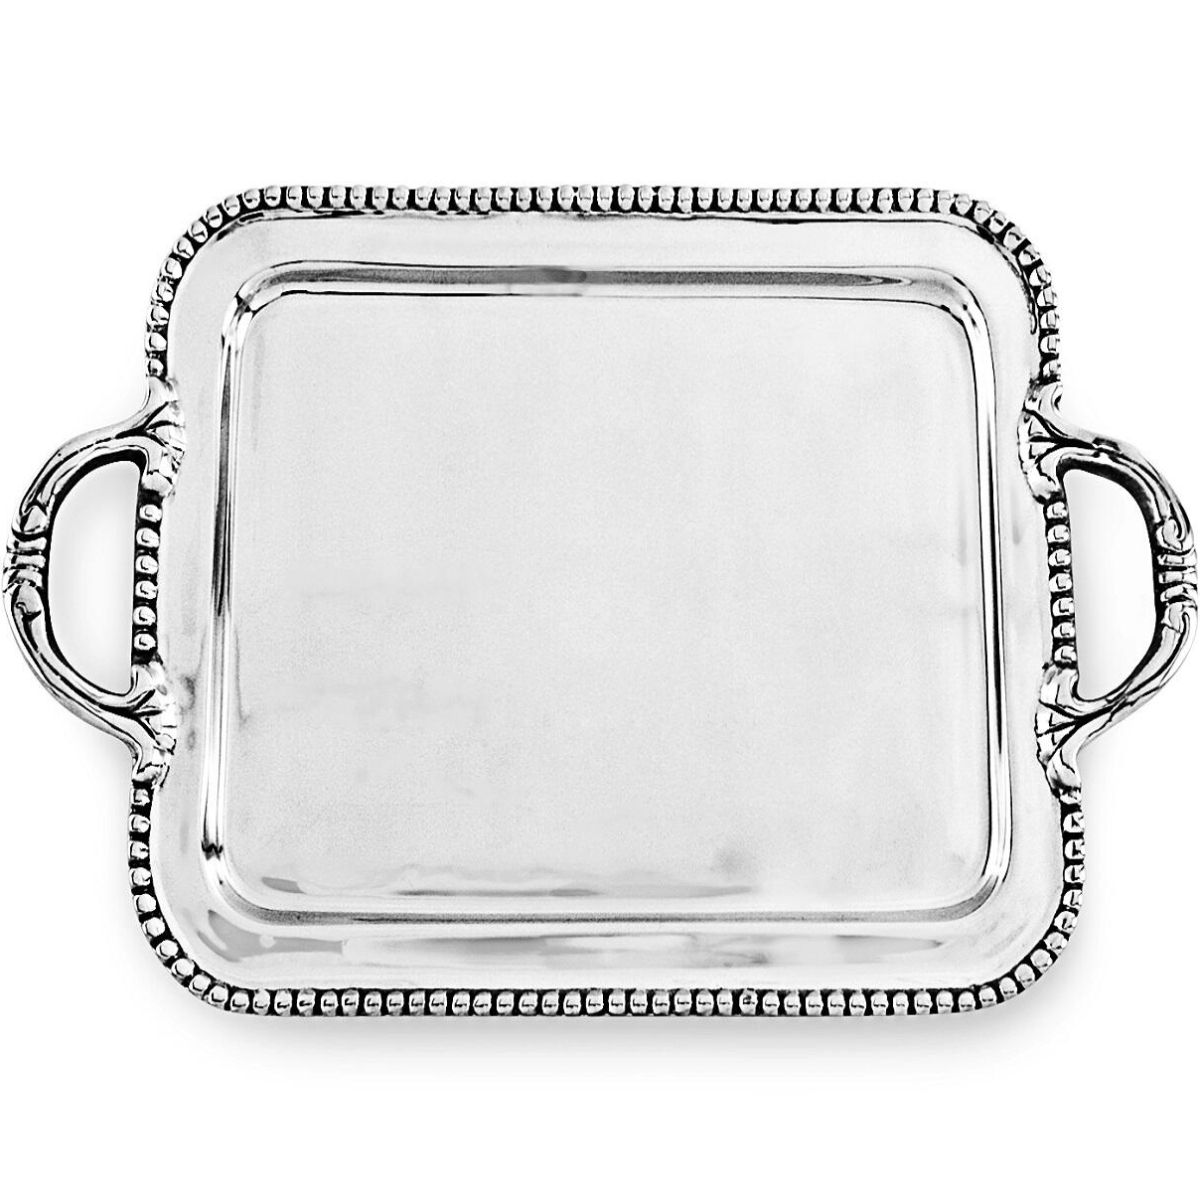 Boho Storage for Jewelry from a Silverware Tray or Utensil Tray